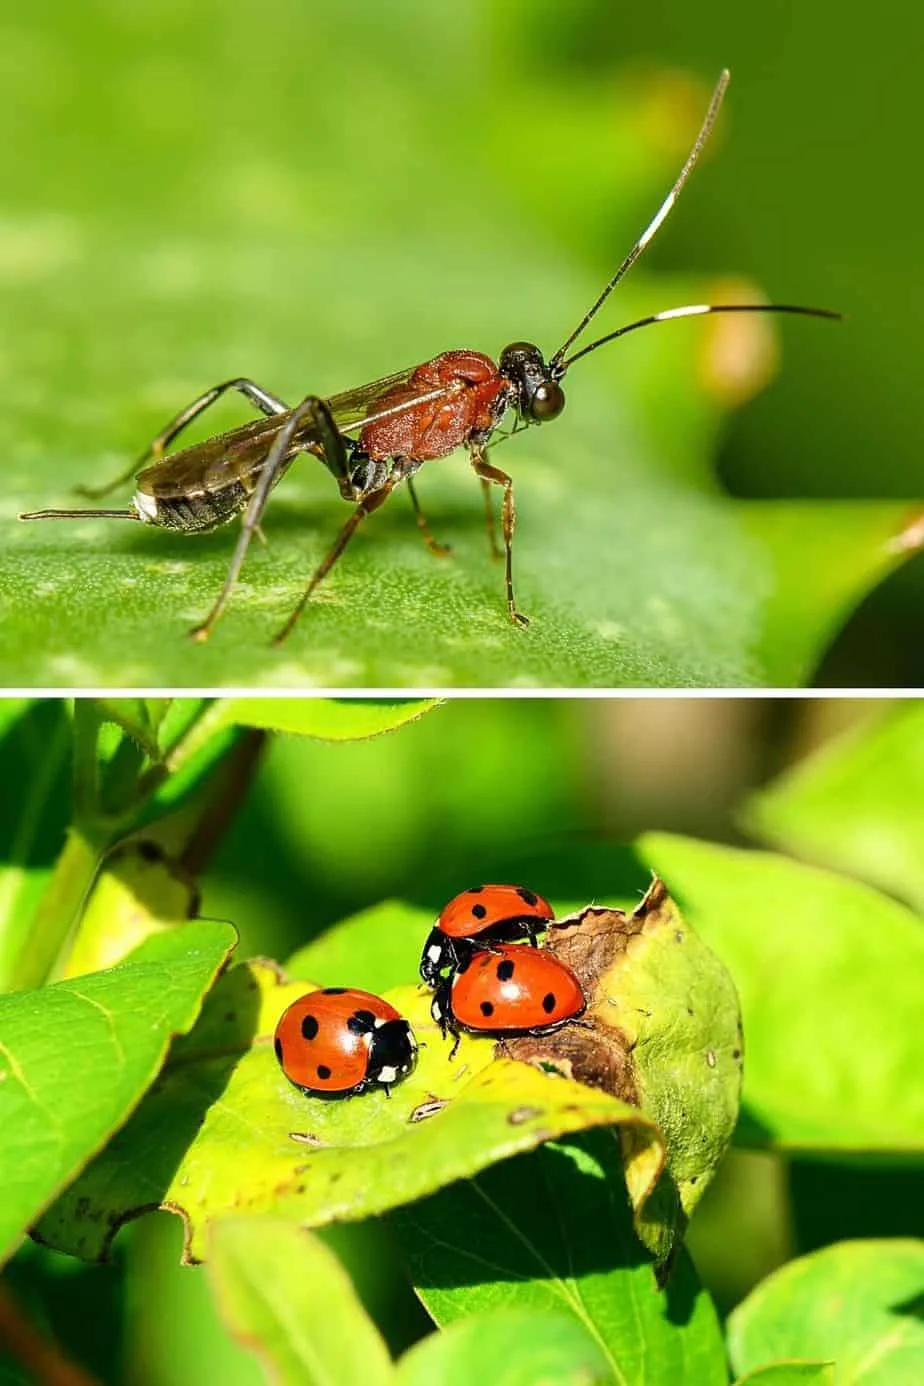 You can use parasitic wasps or ladybugs to feed on the aphids living on the soil surface